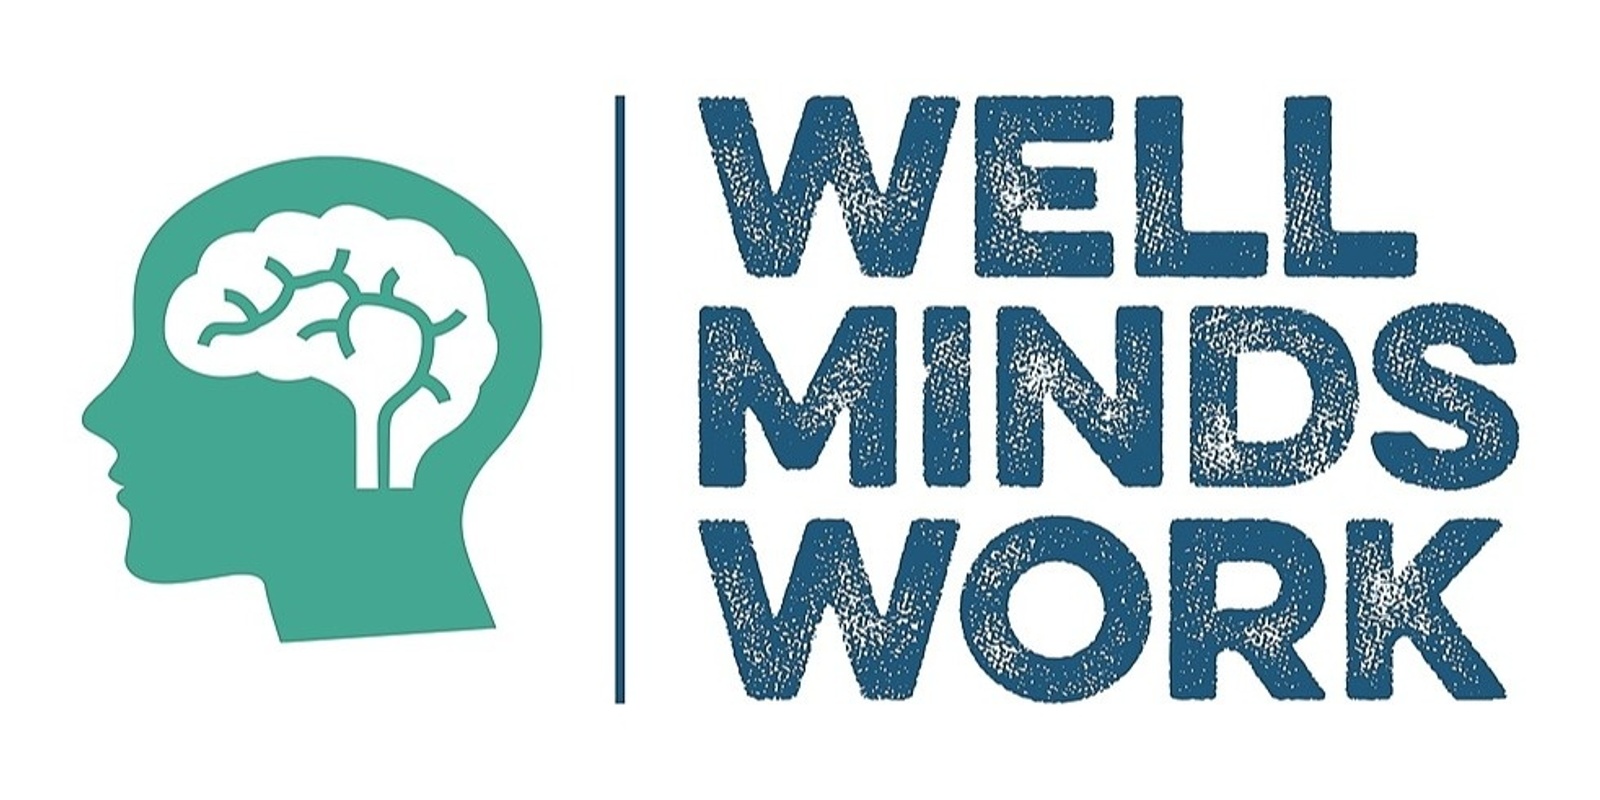 Well Minds Work's banner